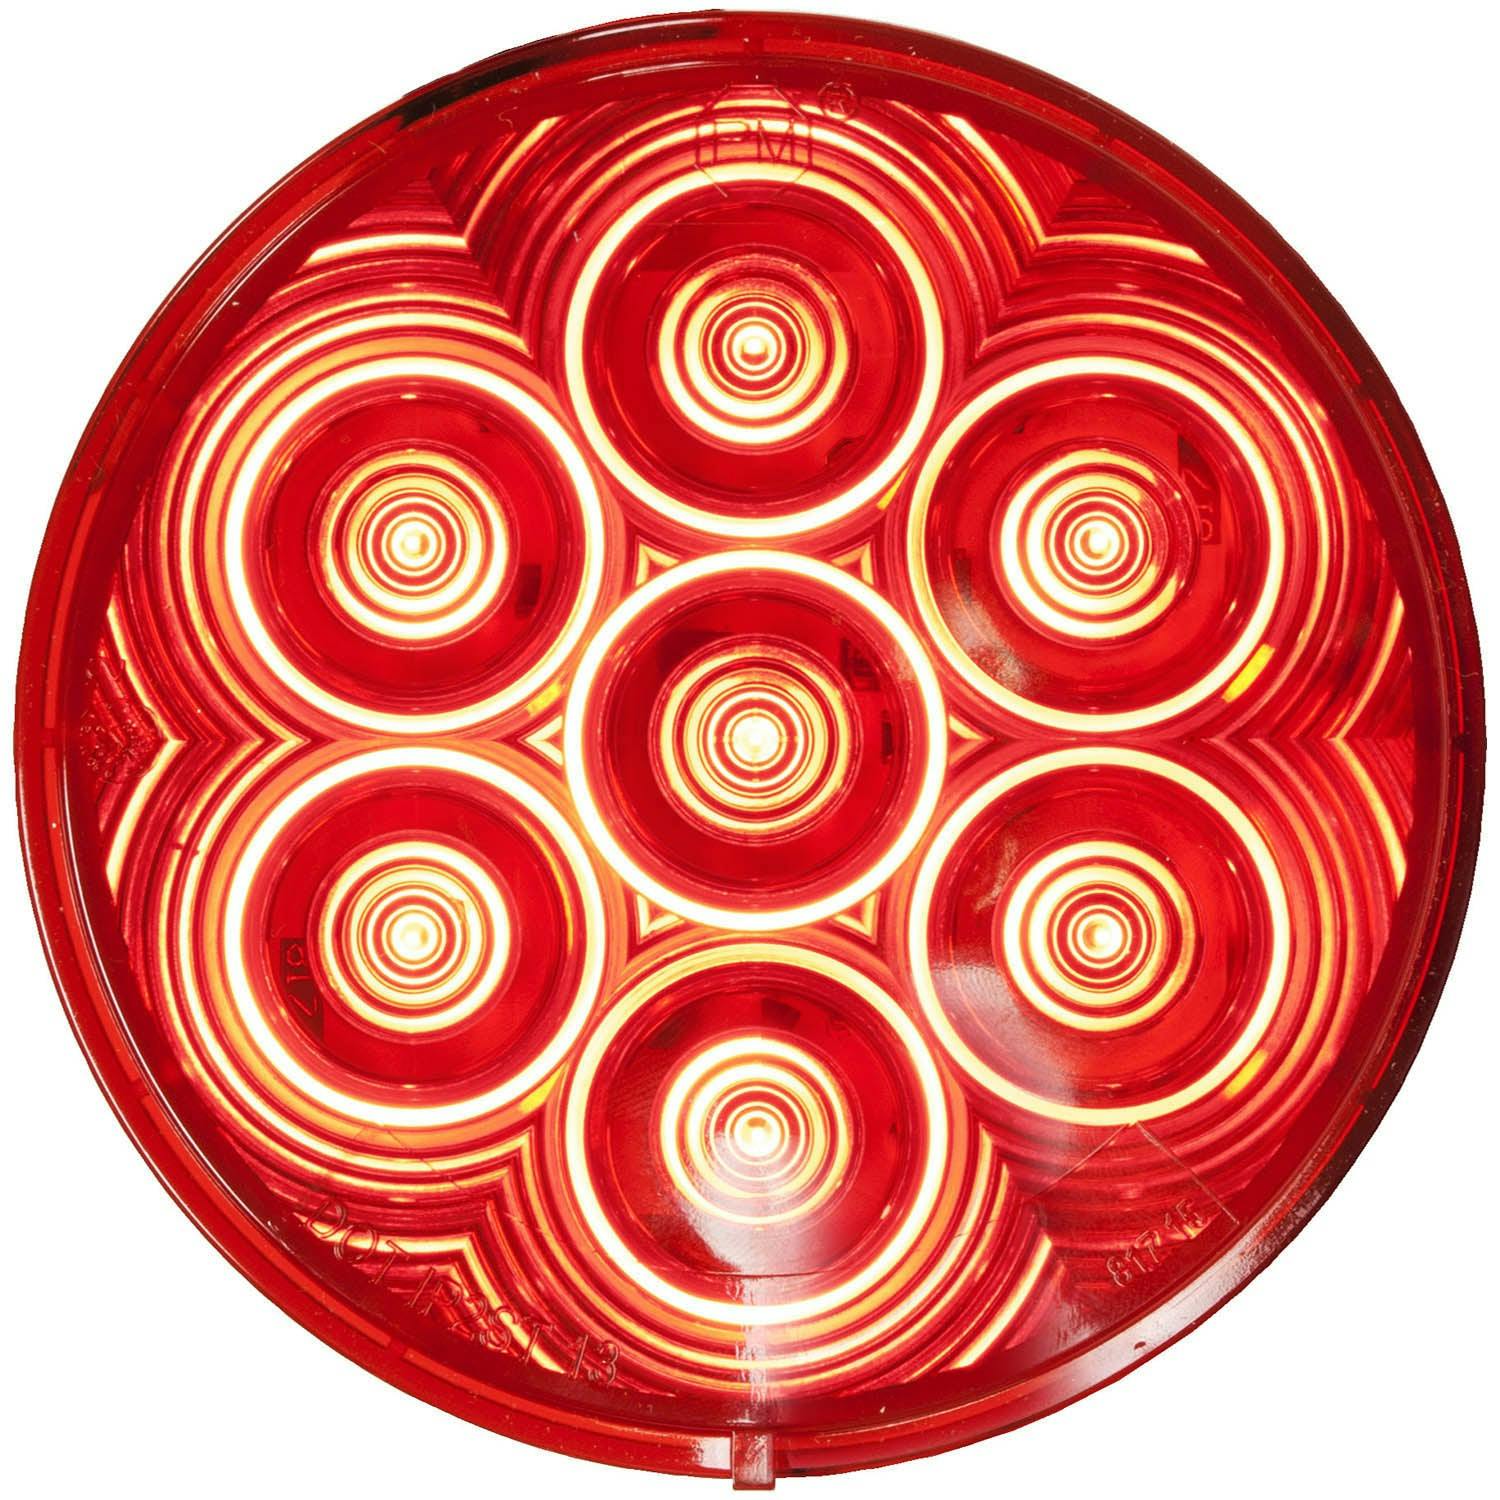 LED Stop/Turn/Tail, Round, Grommet-Mount, Kit, 4", red (Pack of 6) - 817R-7_1e569121-30cb-4e78-a027-554125de9407